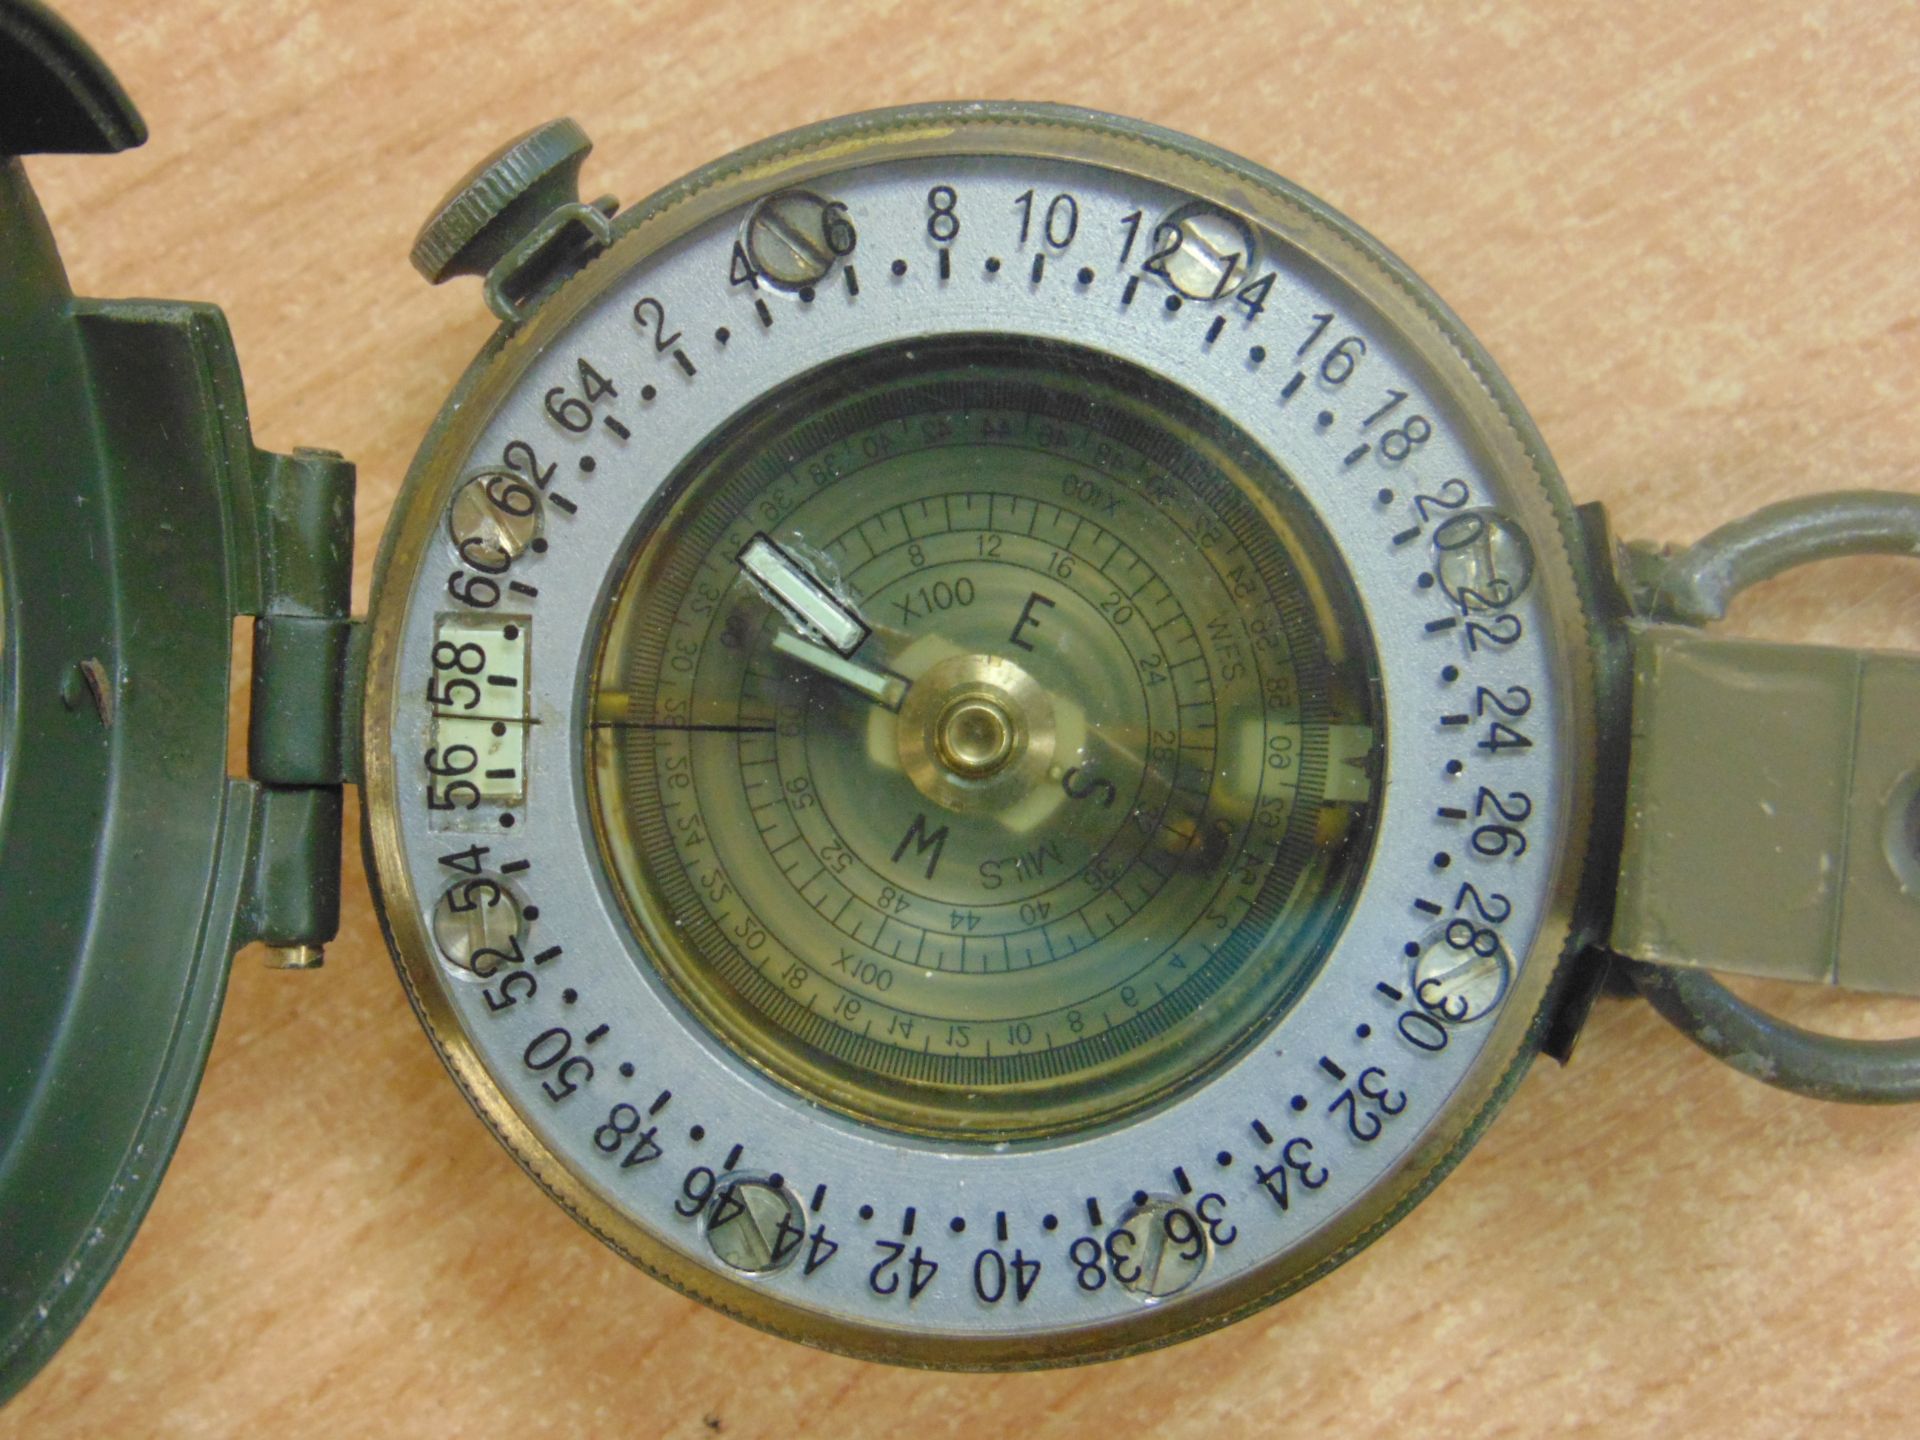 STANLEY LONDON BRITISH ARMY PRISMATIC COMPASS NATO MARKS IN MILS - Image 3 of 7